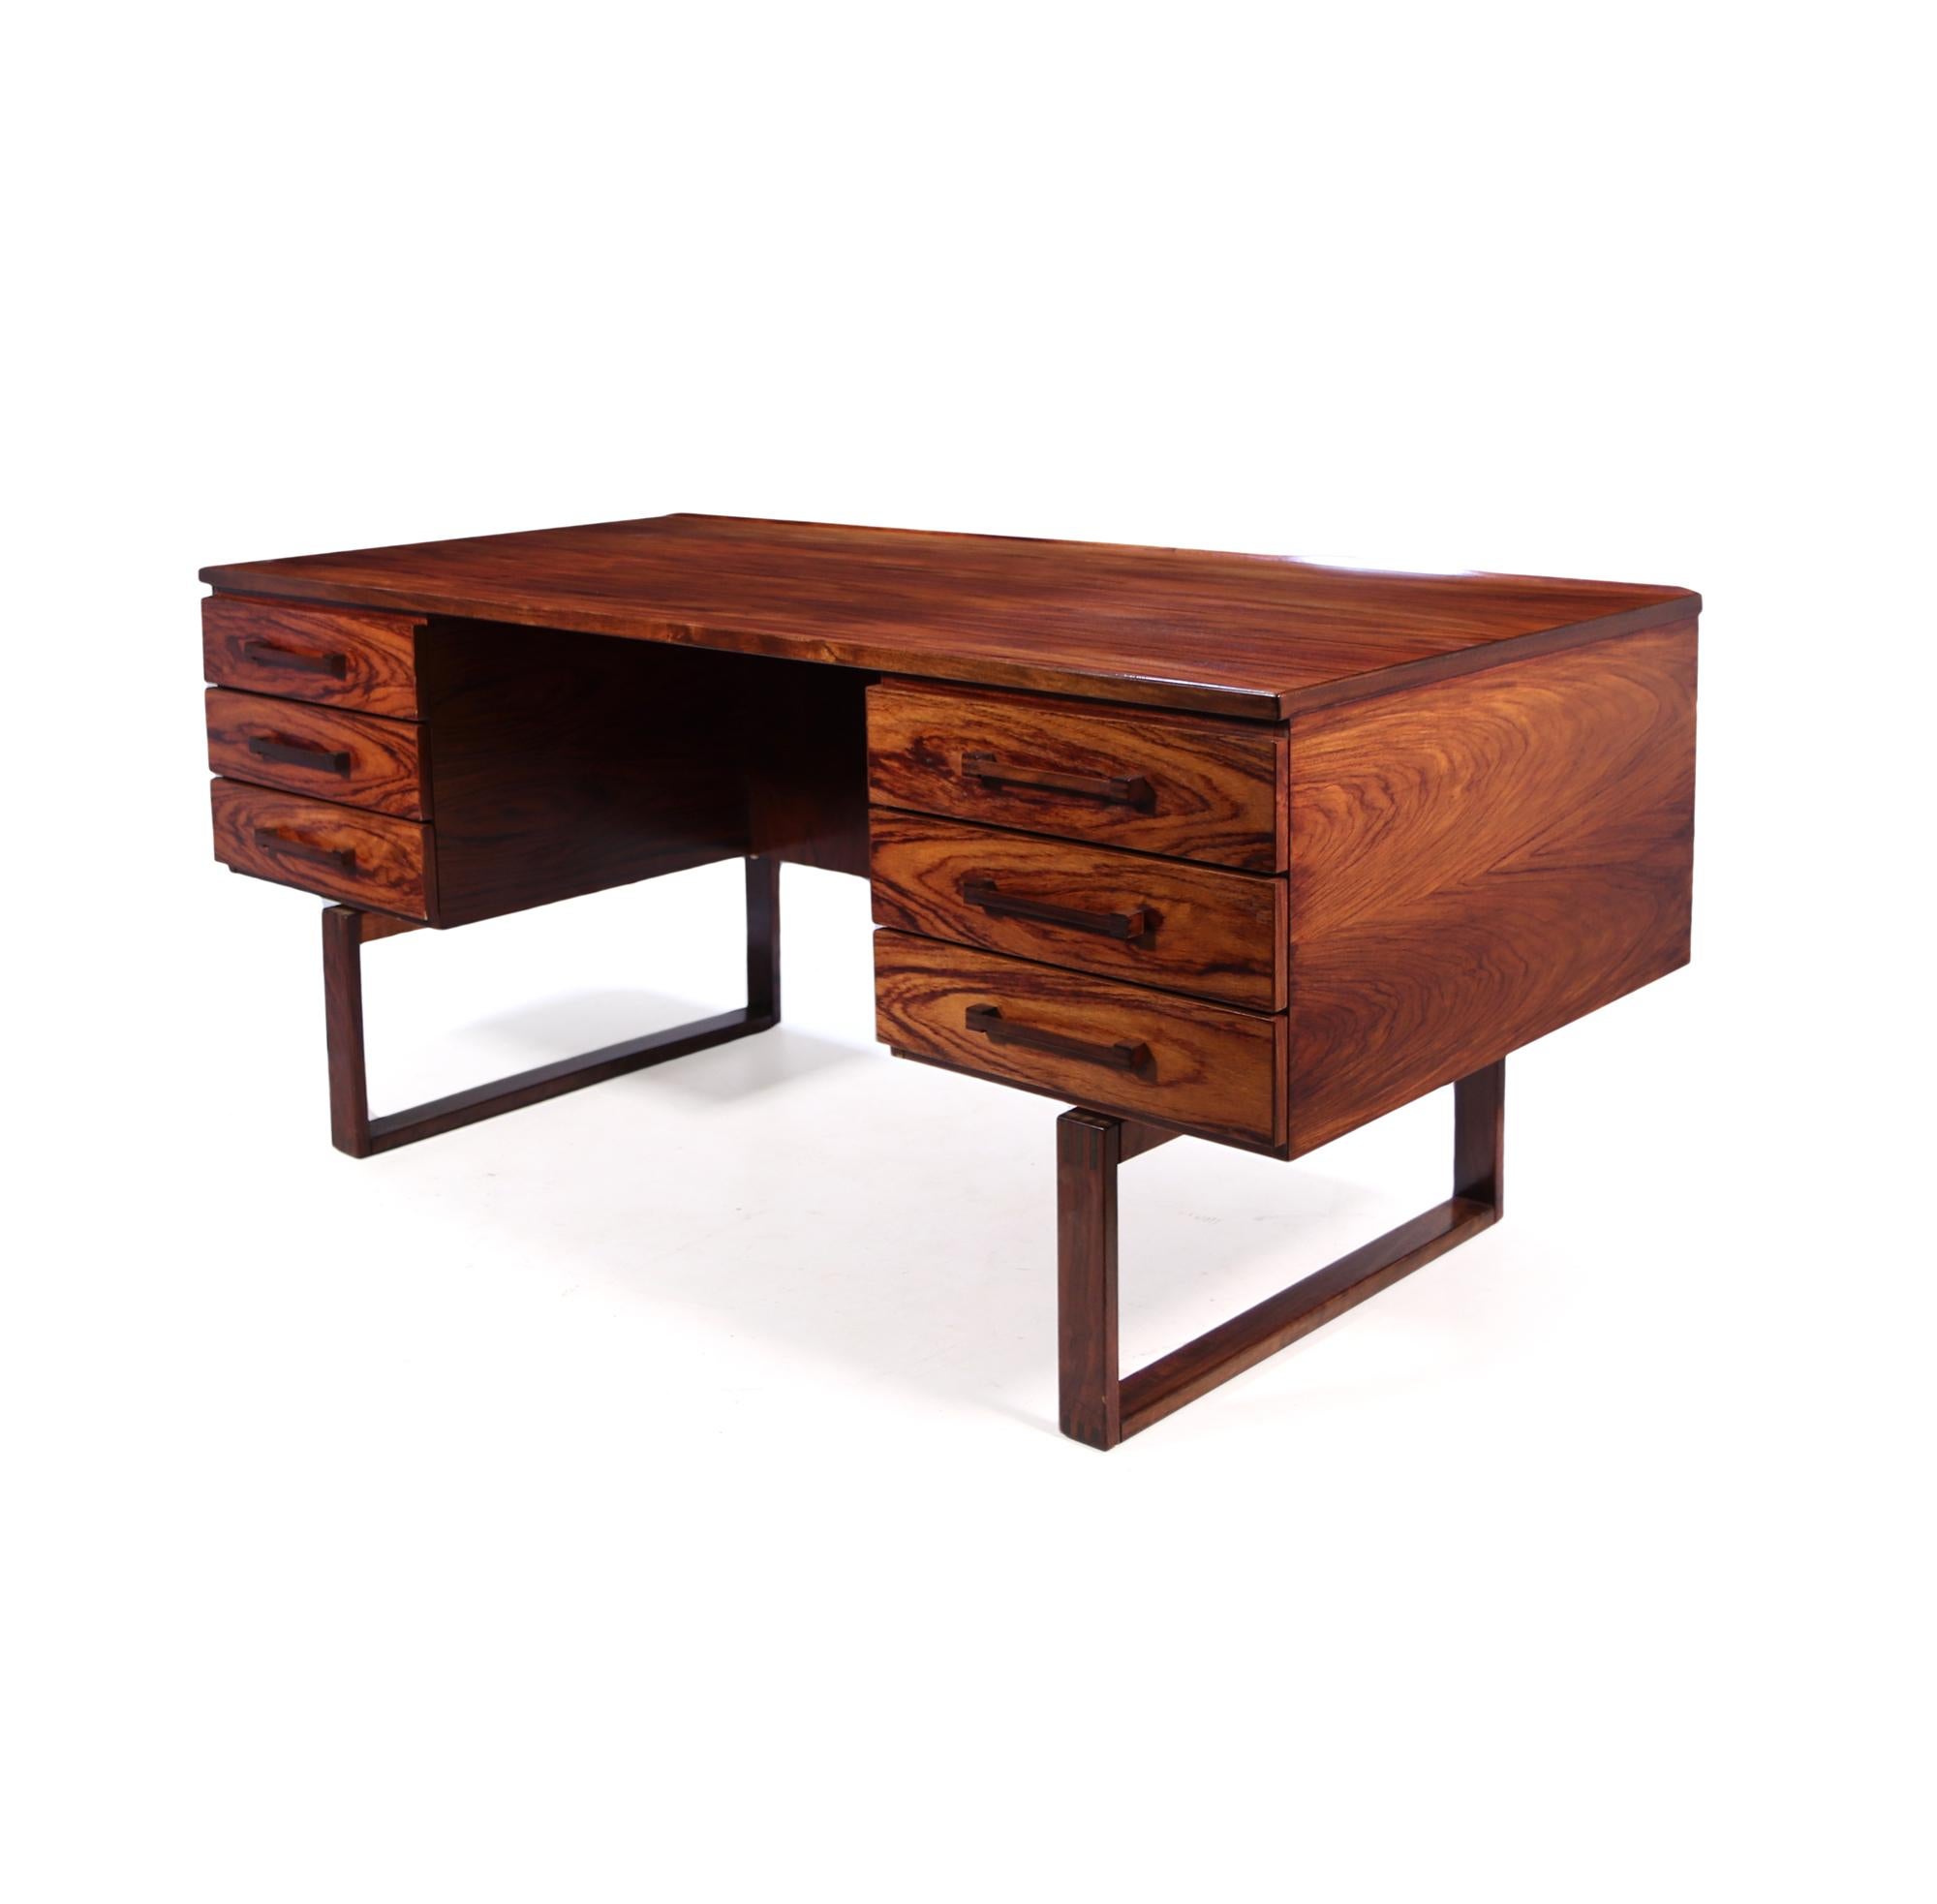 Designed by Henning Jensen and Torbin Valeur in Denmark in the mid 1960's. This rosewood desk has beautiful graining to the desk and has exposed finger joint construction sled feet and on the drawer handles. Highlighted by a subtle raised lip along